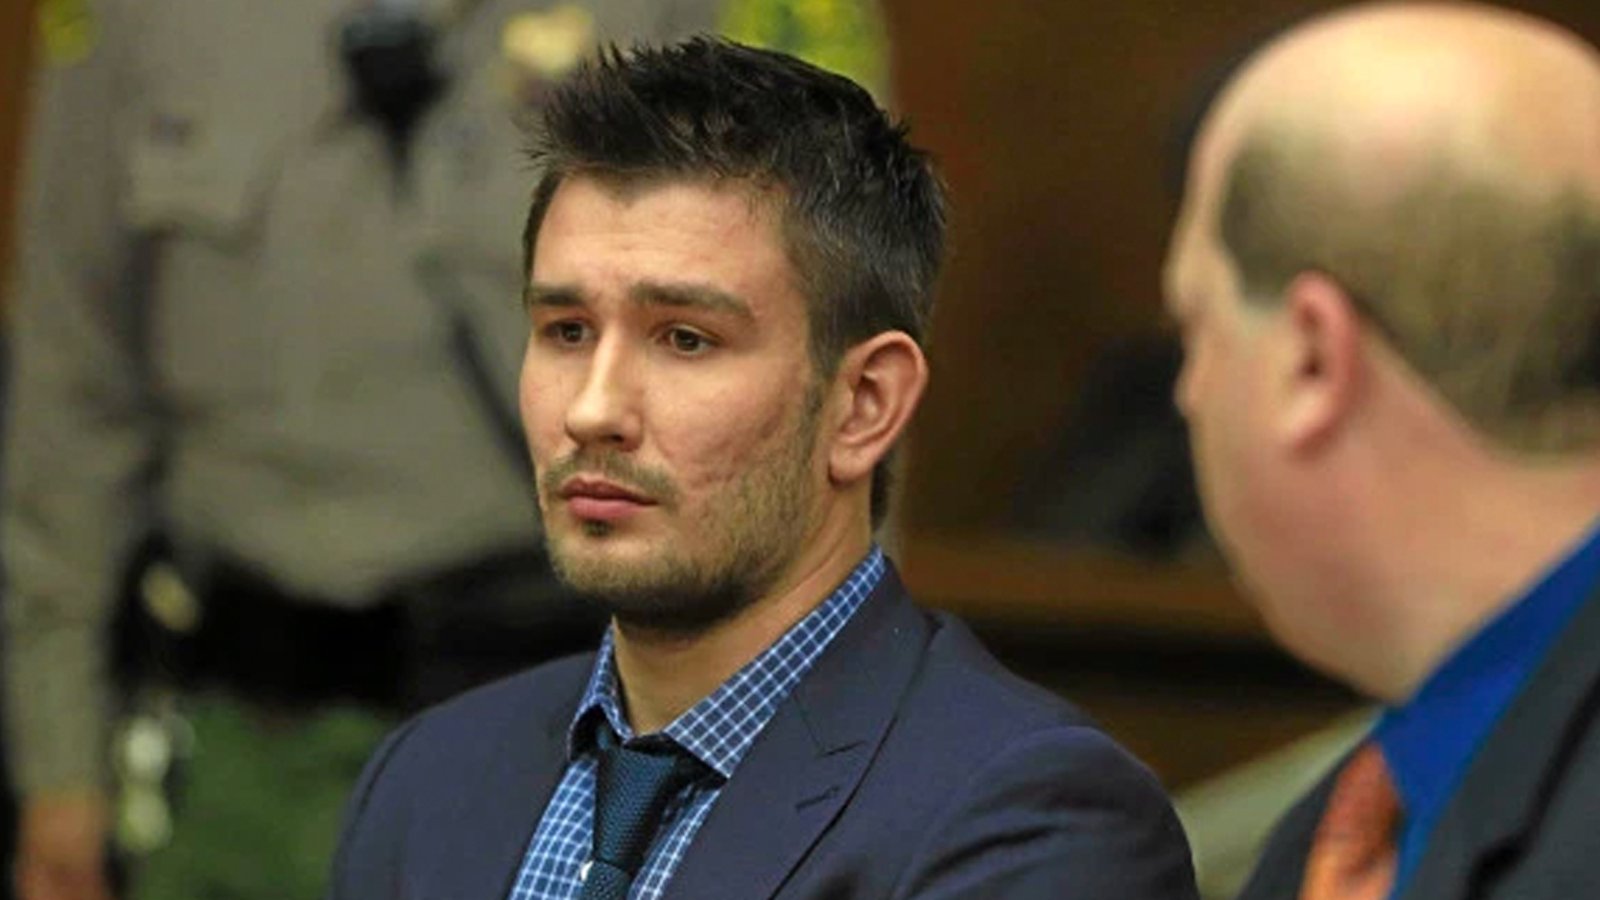 Breaking: NHL hands out further punishment to disgraced defenseman Slava Voynov